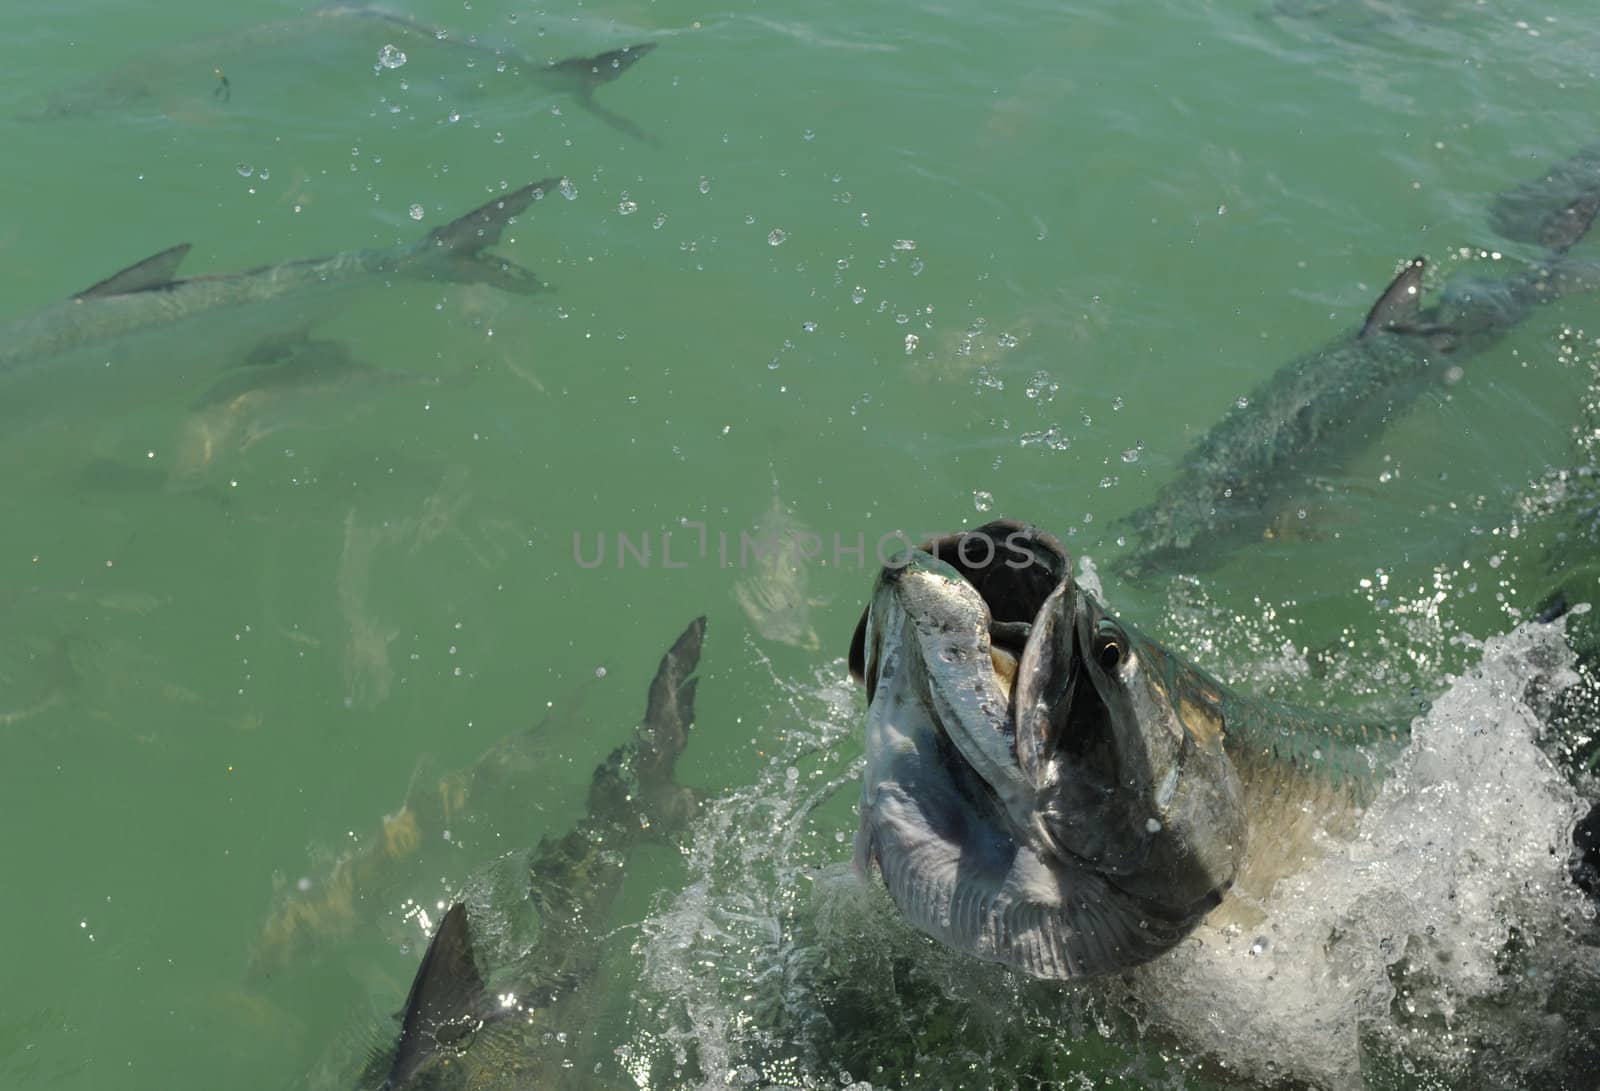 Tarpon fish jumping out of water with other tarpons swimming nea by ftlaudgirl